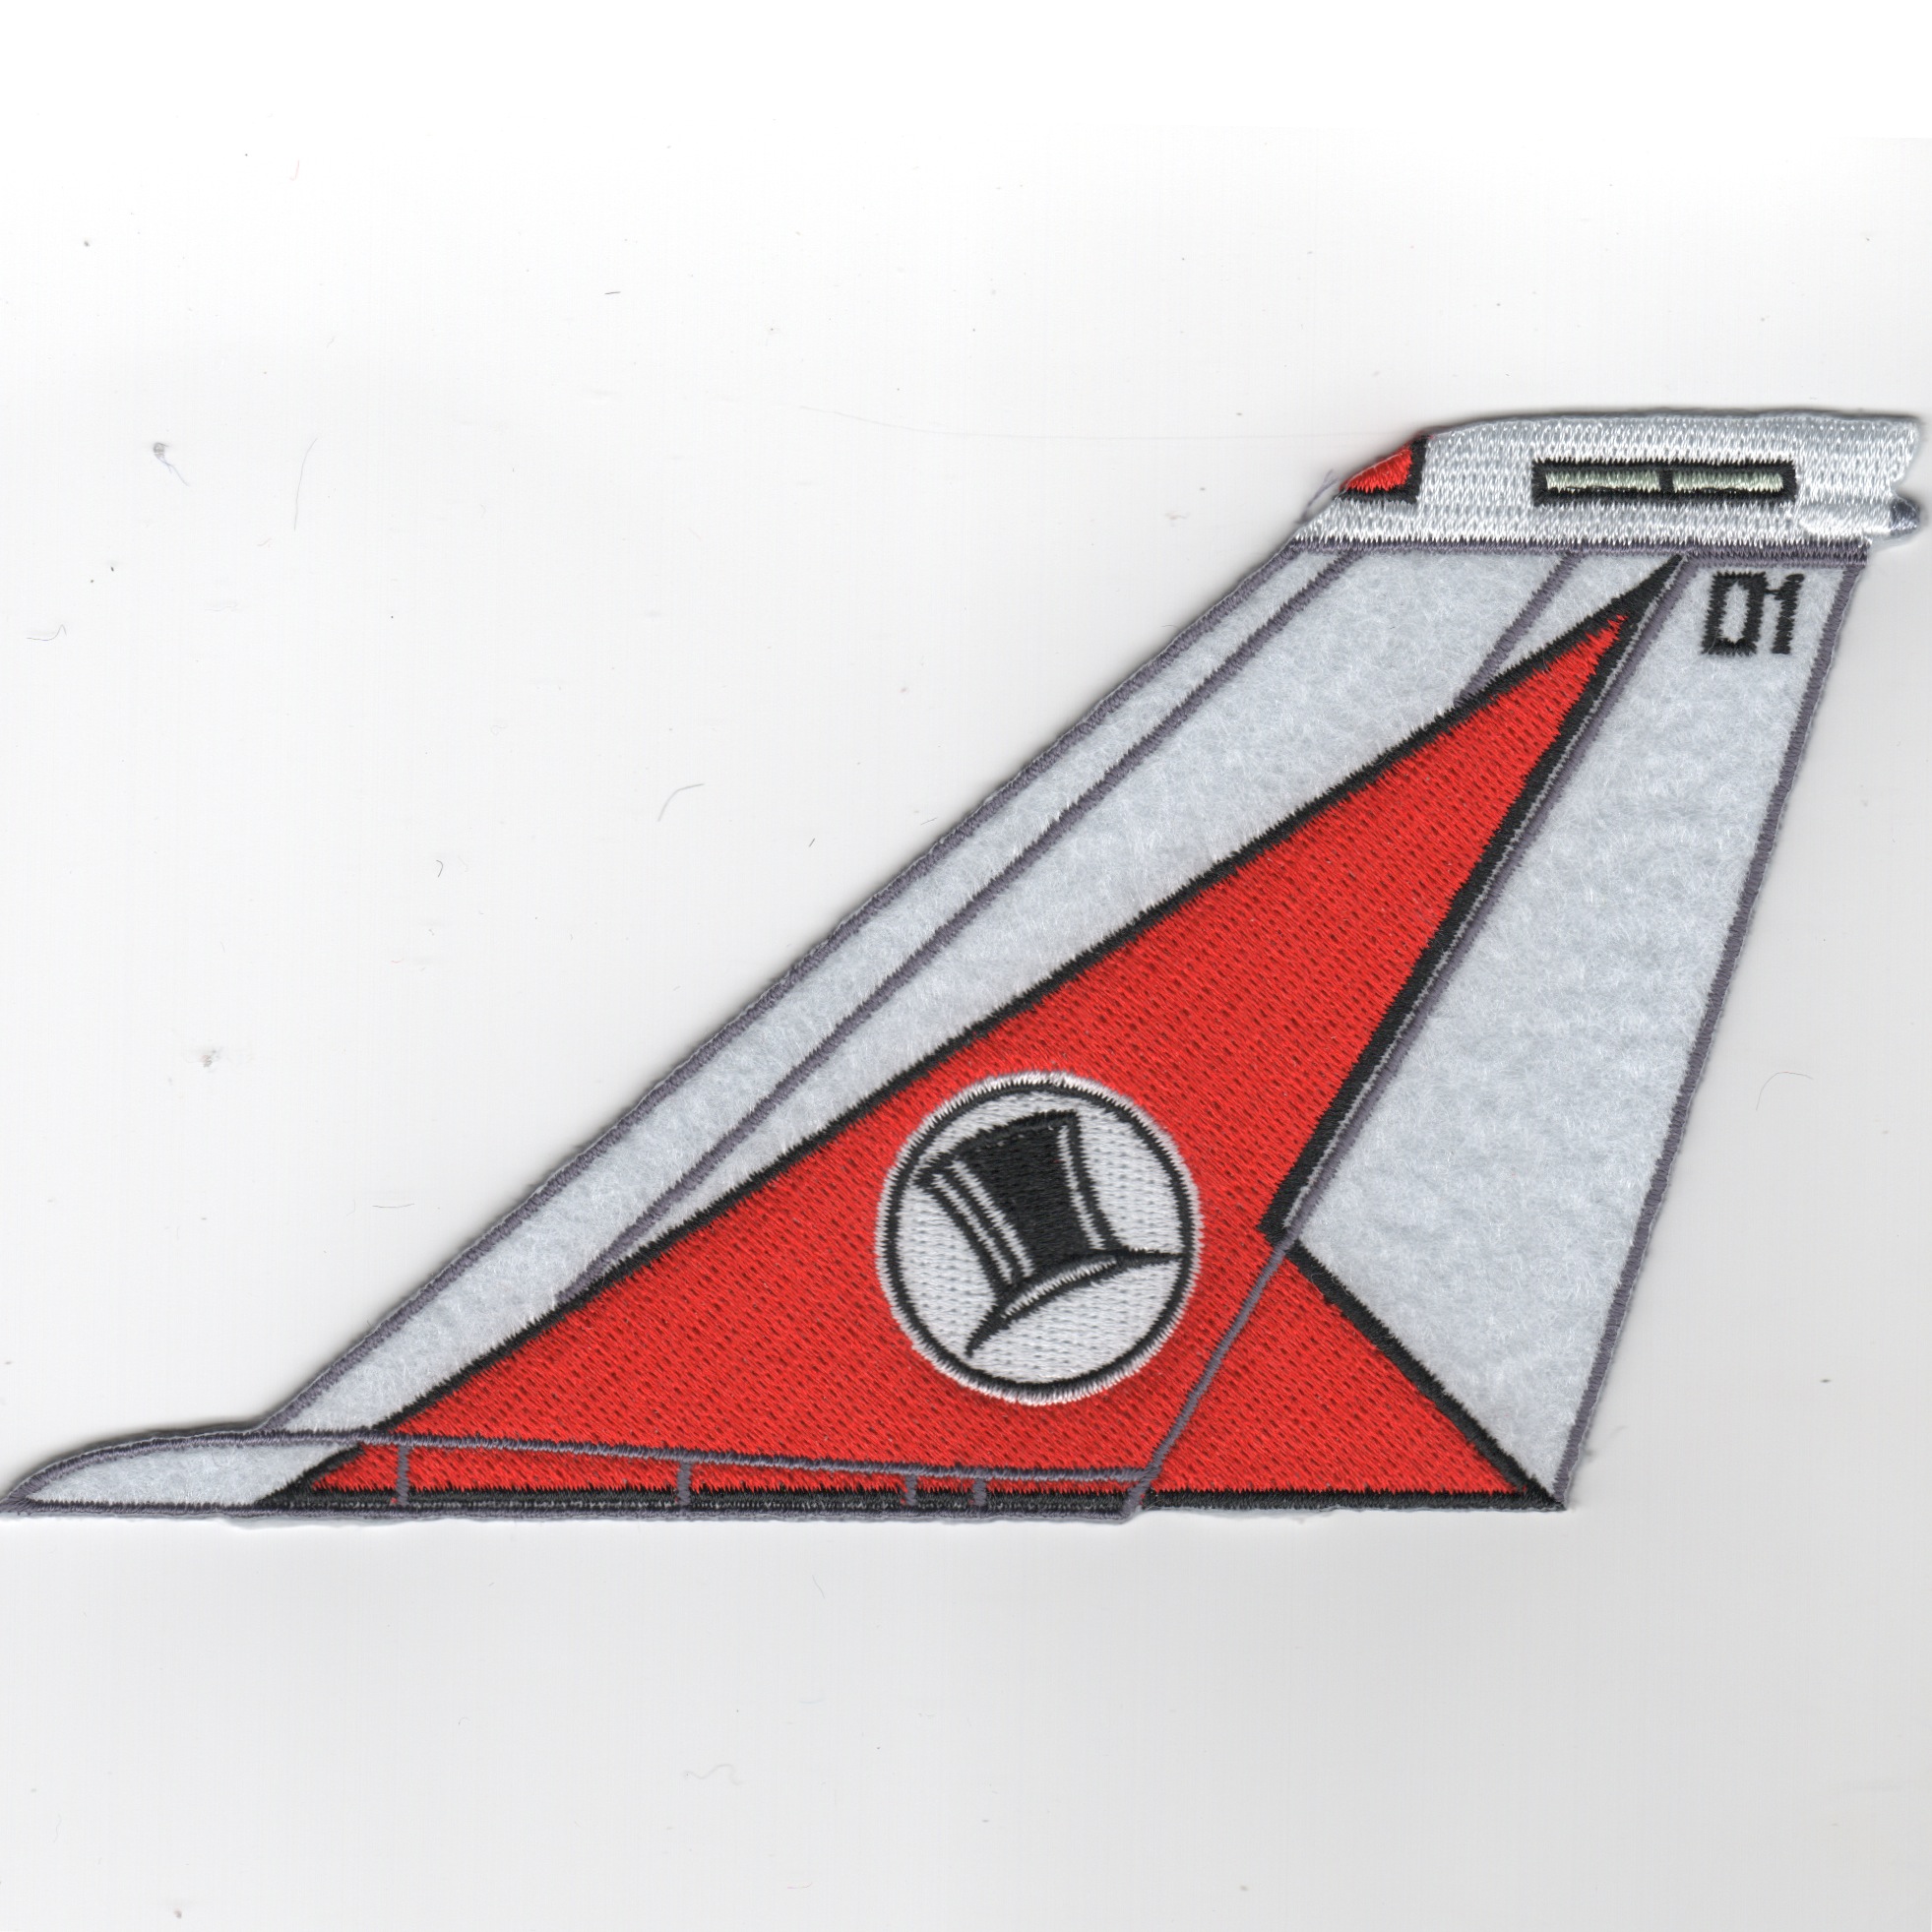 VF-14 F-14 Tomcat Tail Fin (Red/White/No Text)